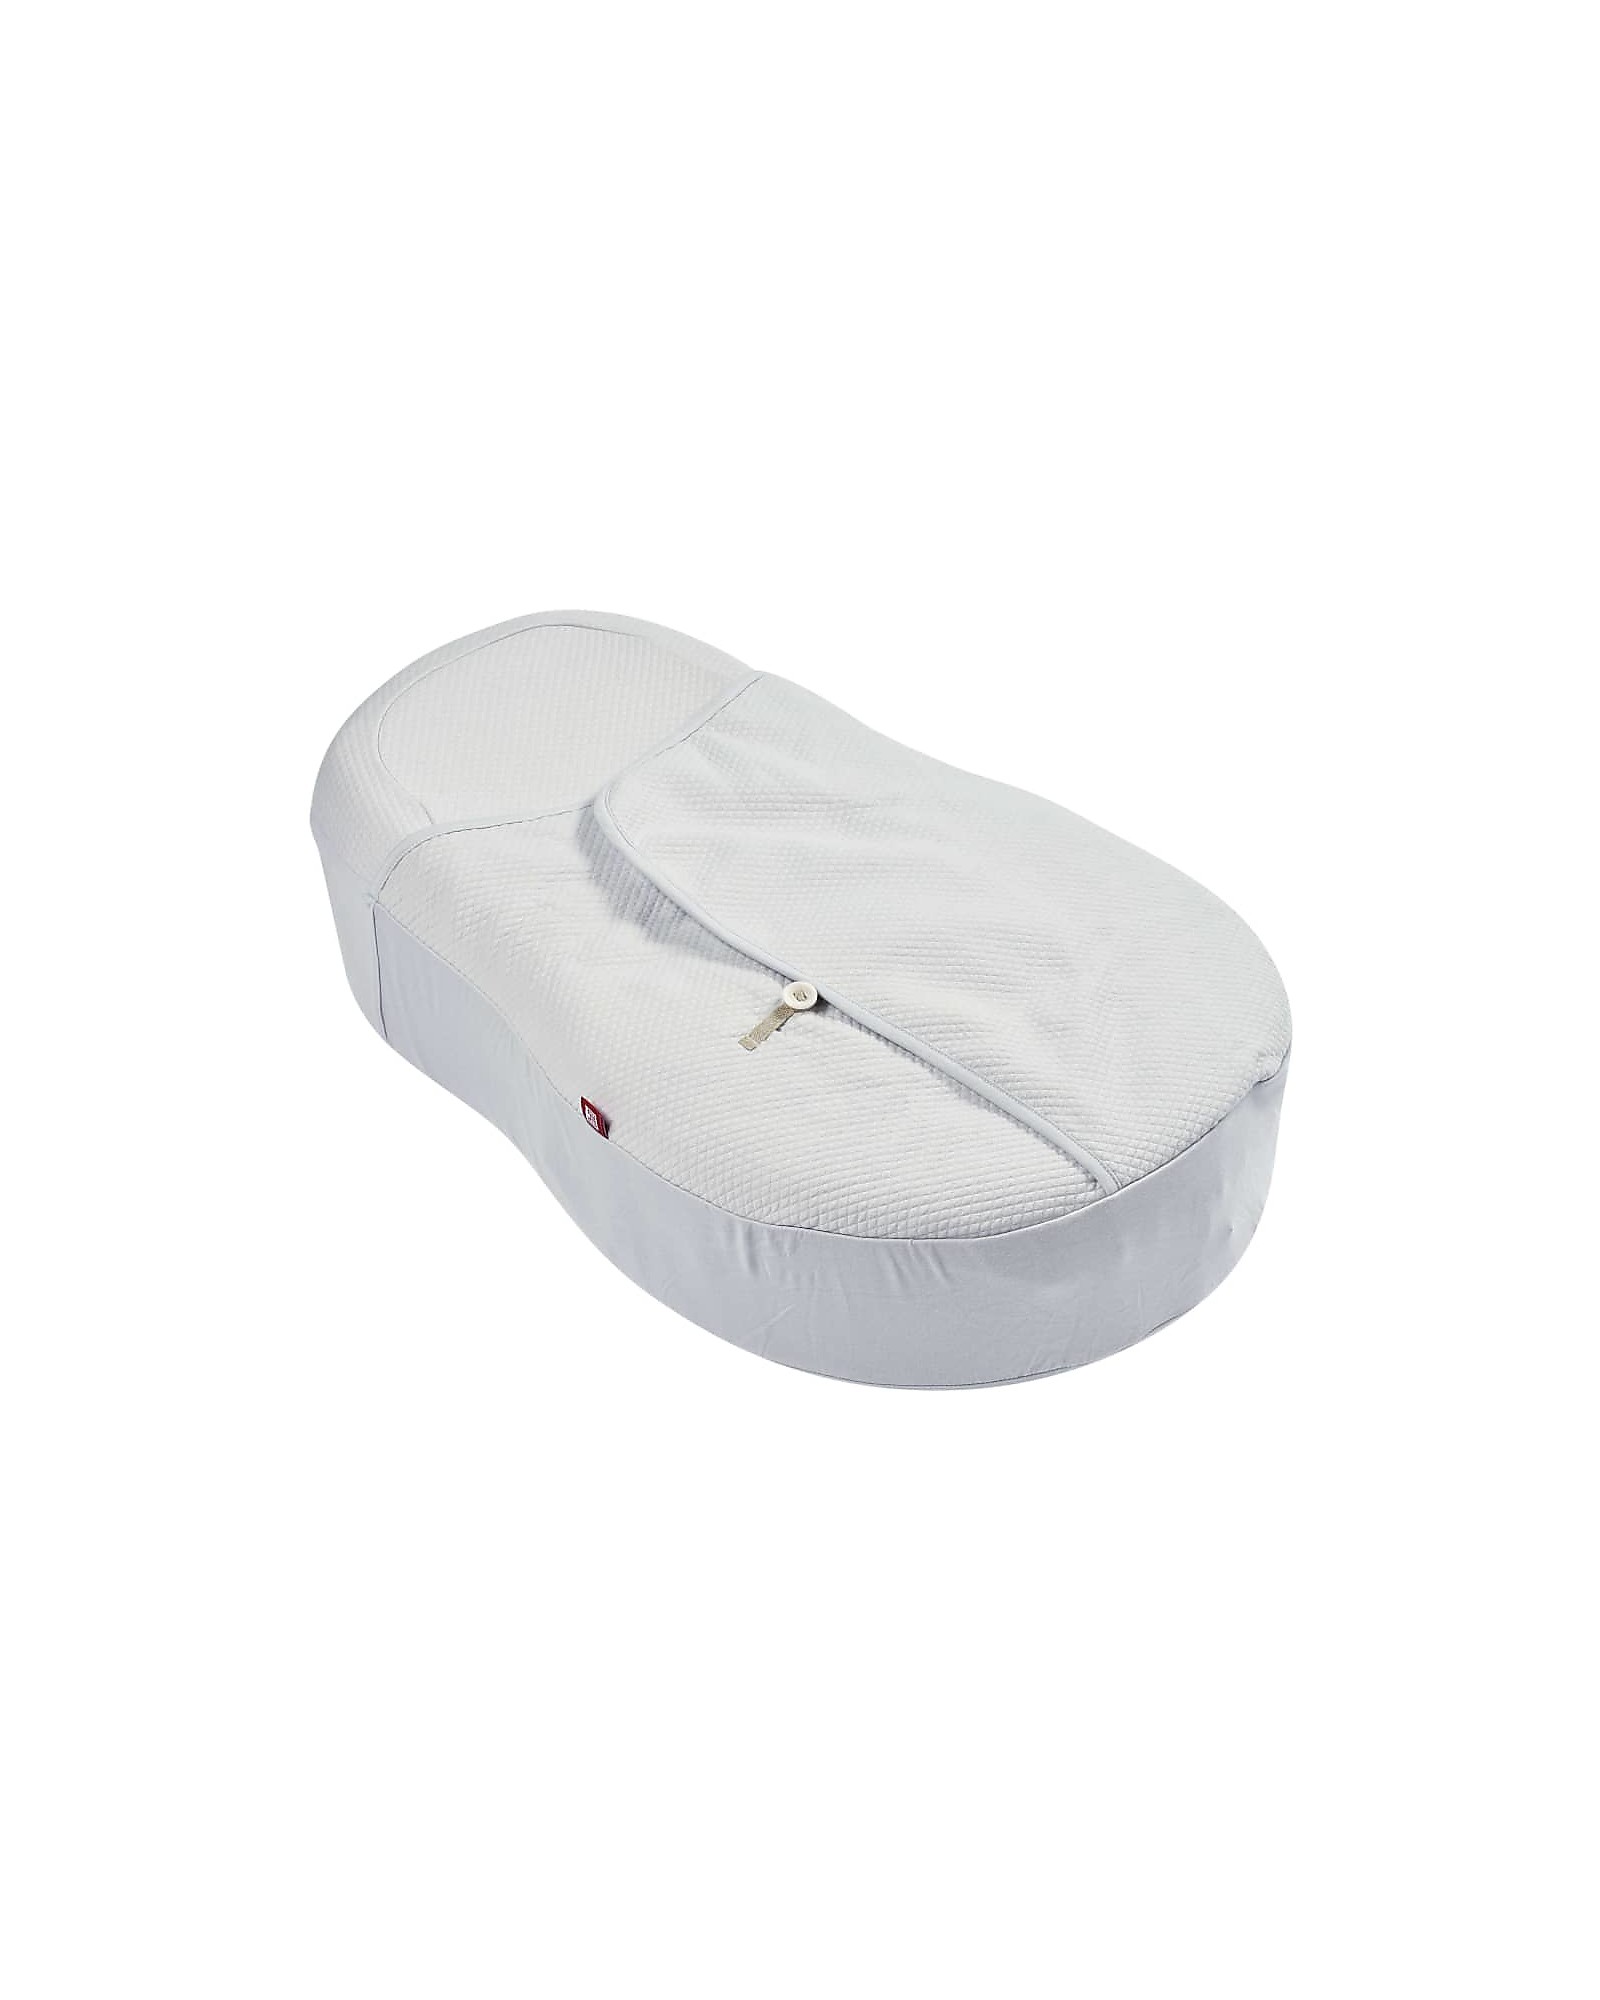 Cocoonababy - Fleur De Cotton White (With Fitted Sheet)